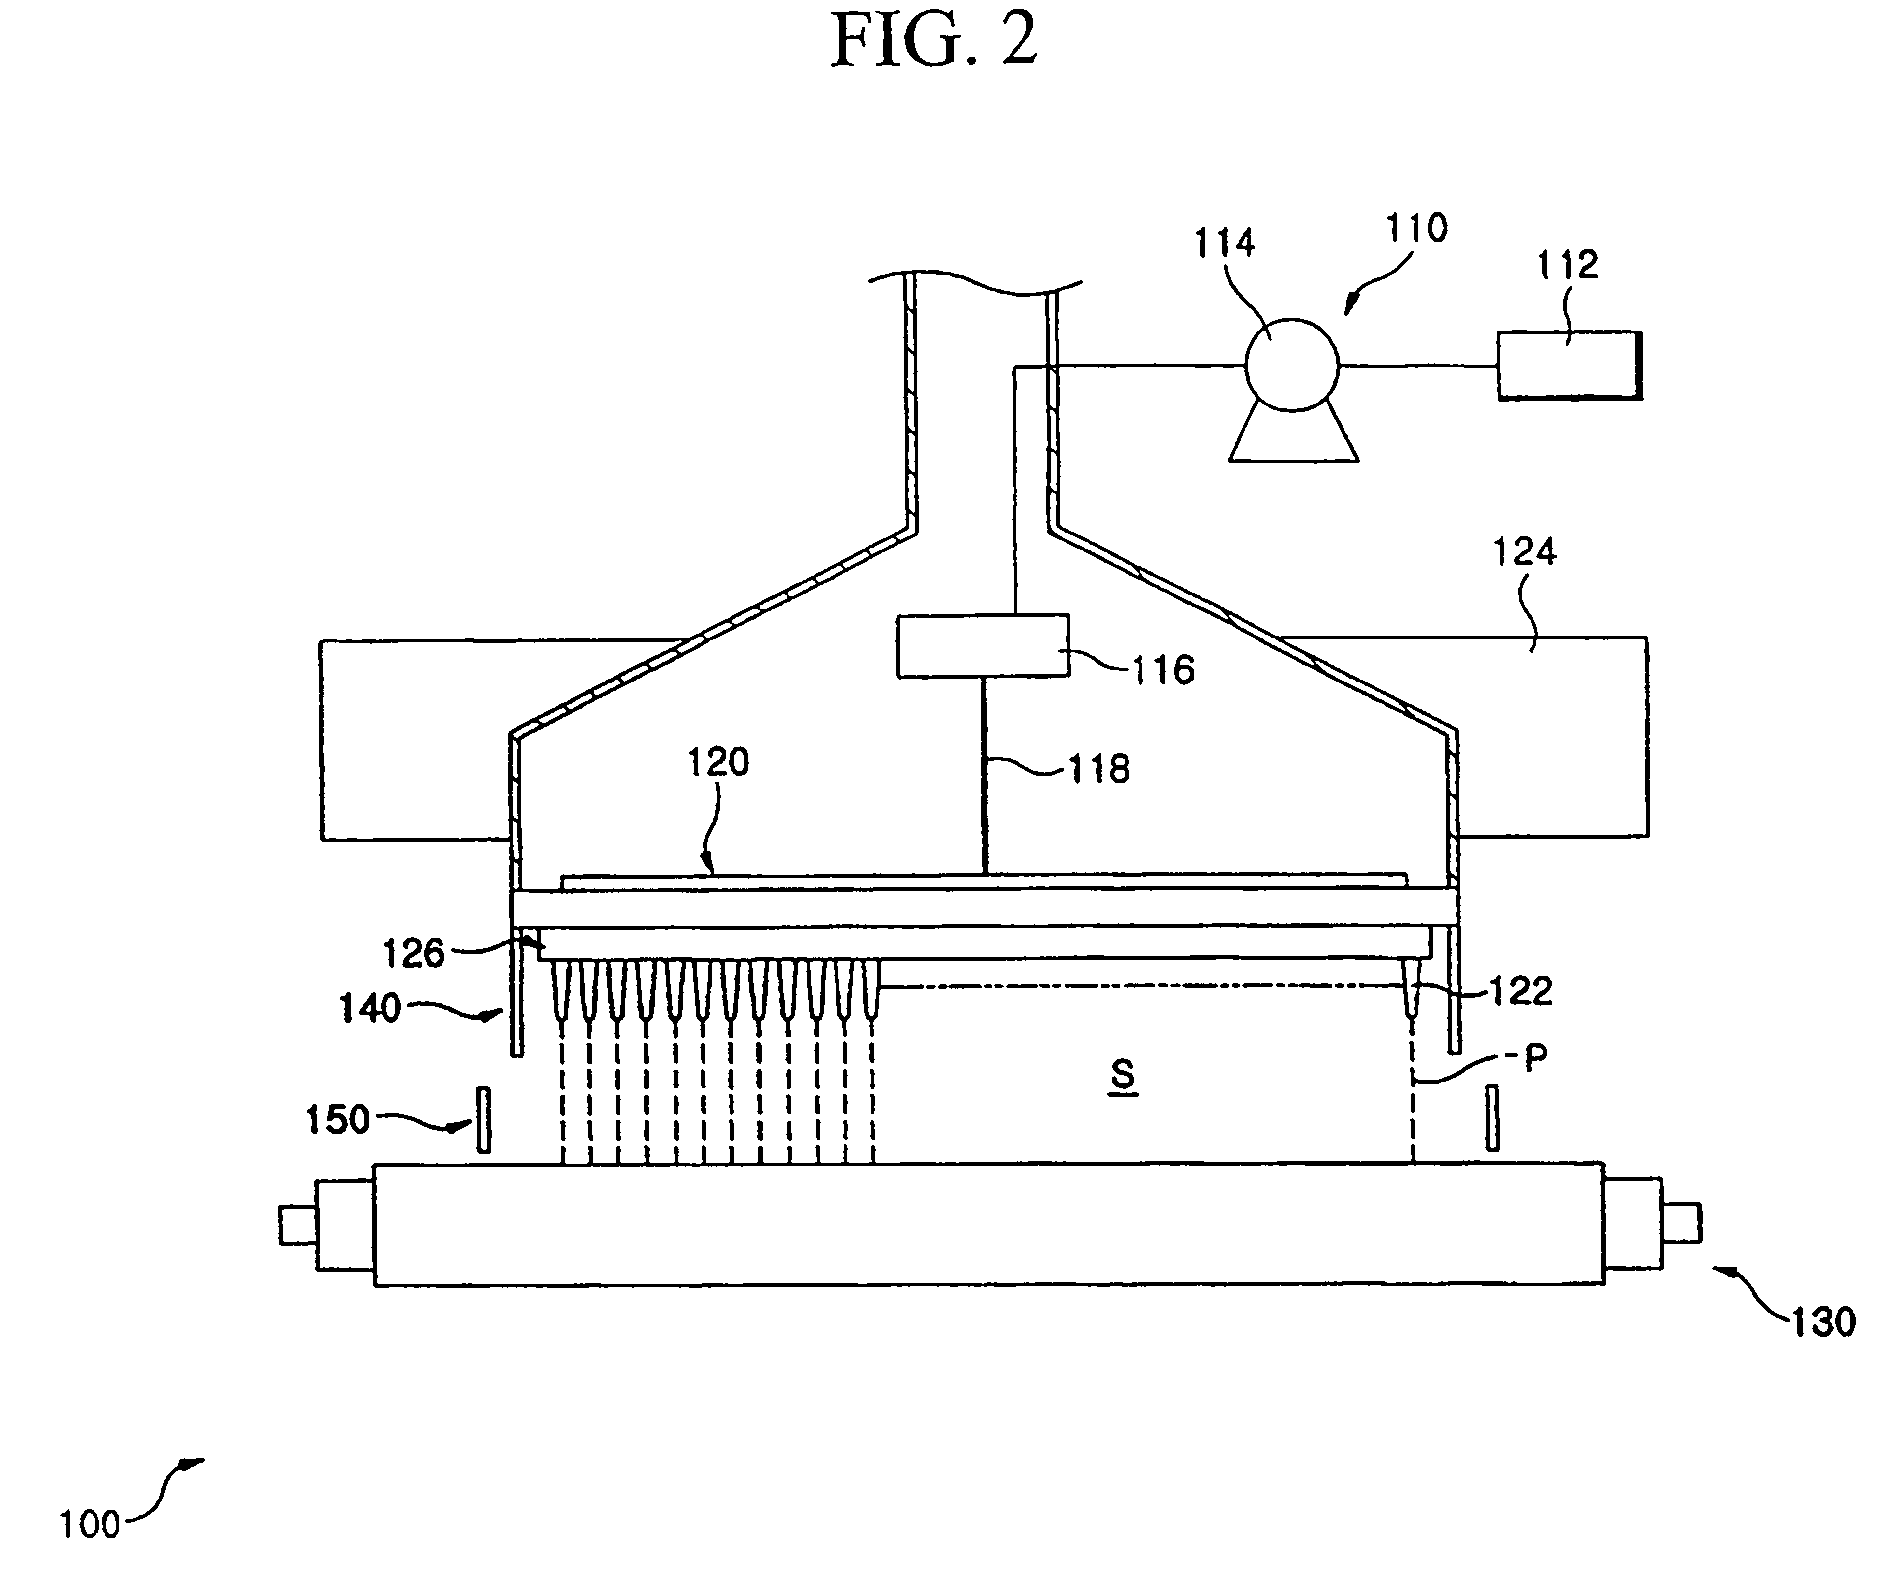 Apparatus for producing nanofiber utilizing electospinning and nozzle pack for the apparatus